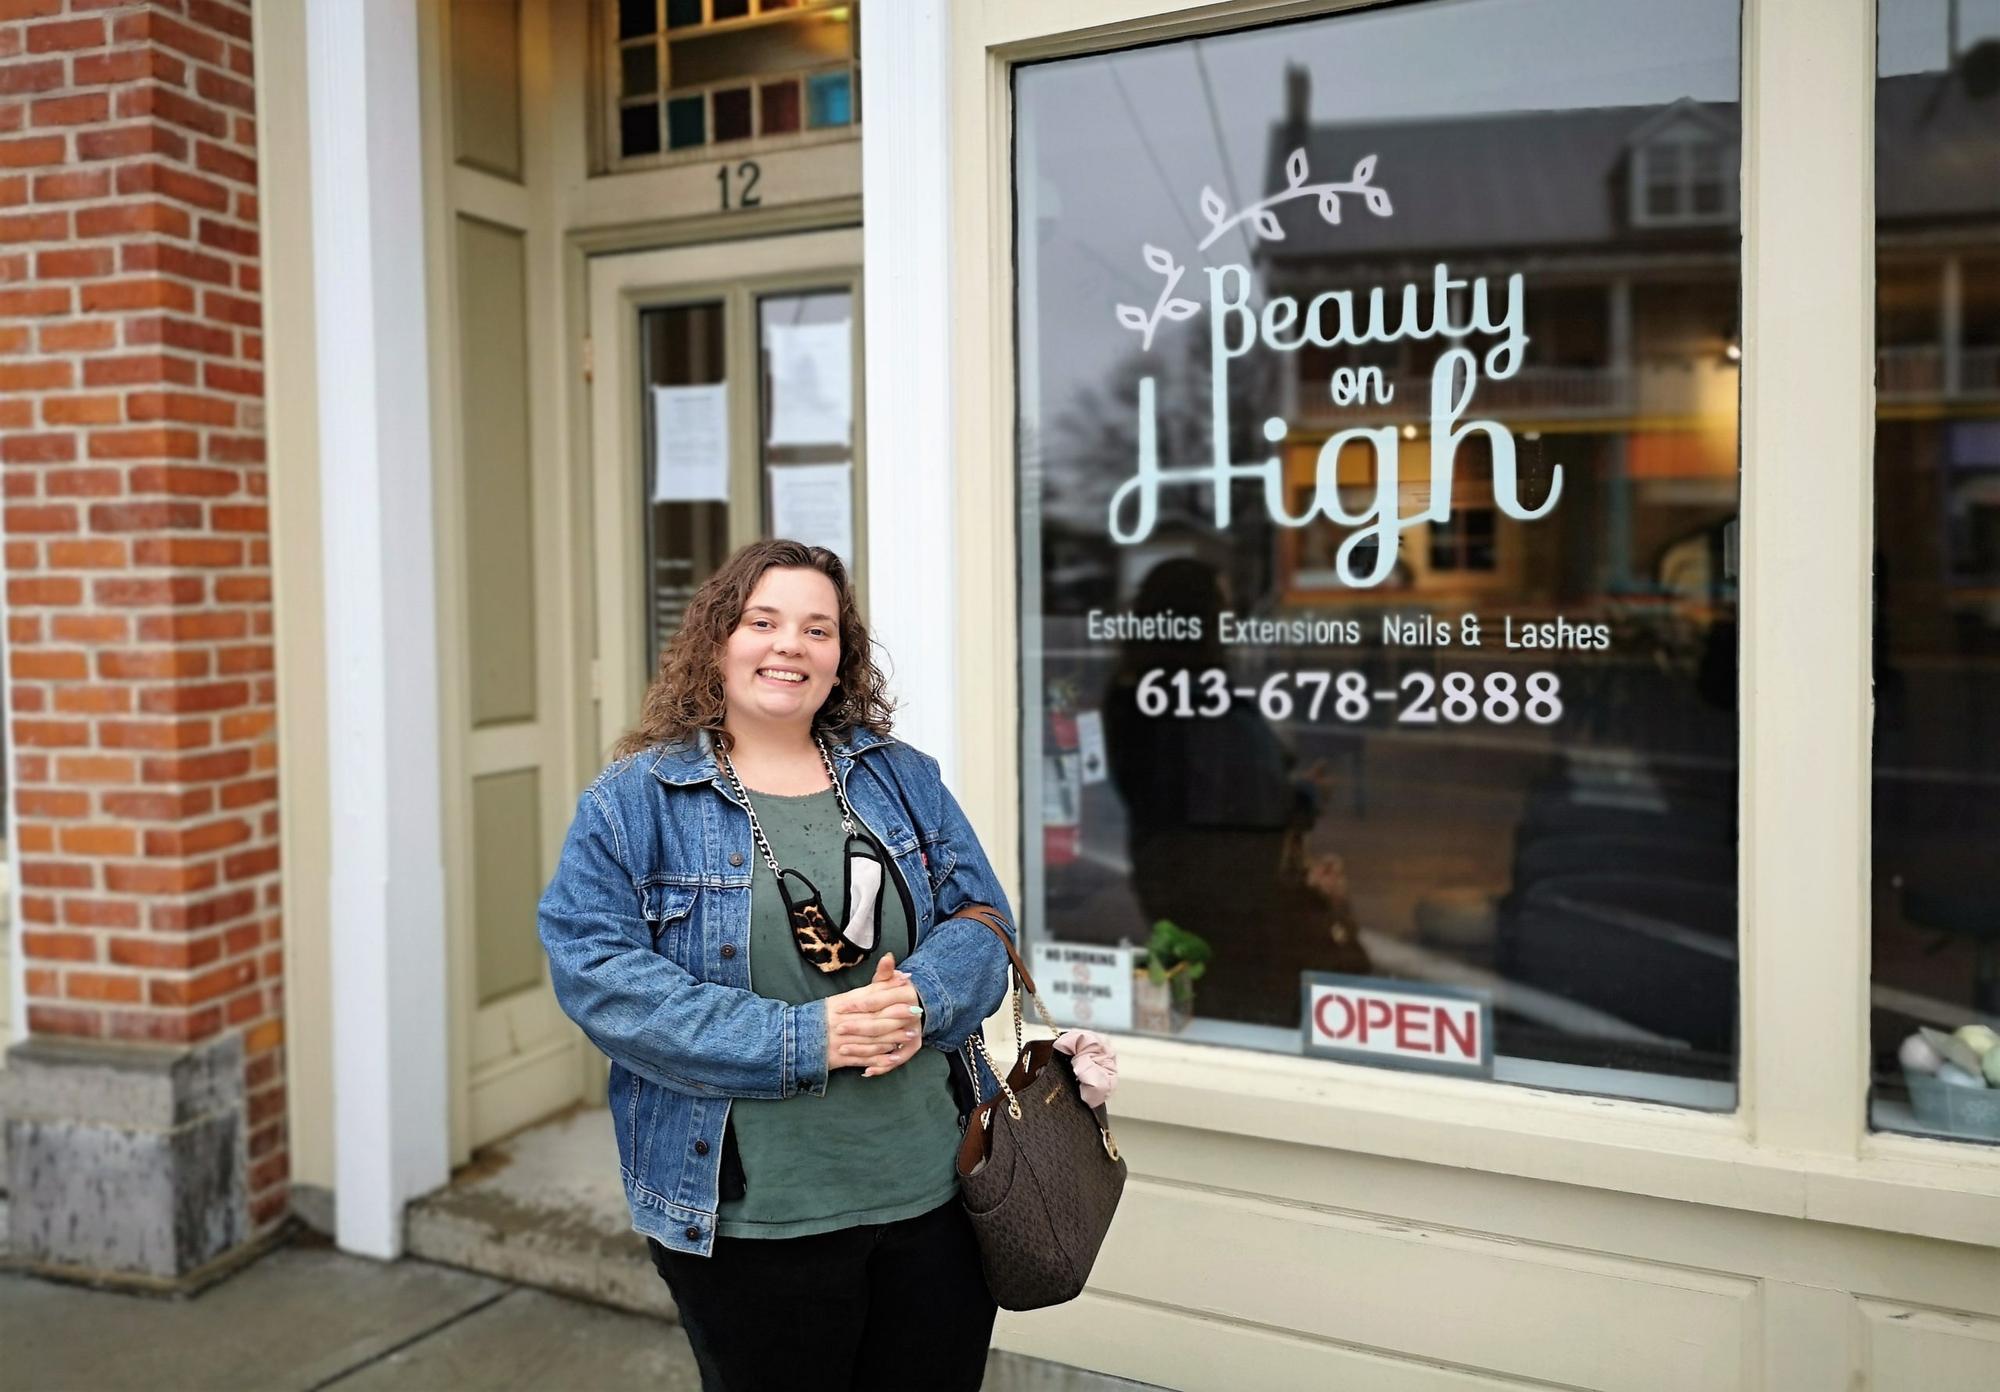 Vankleek Hill beauty salon owner defying shutdown says it is a matter of survival